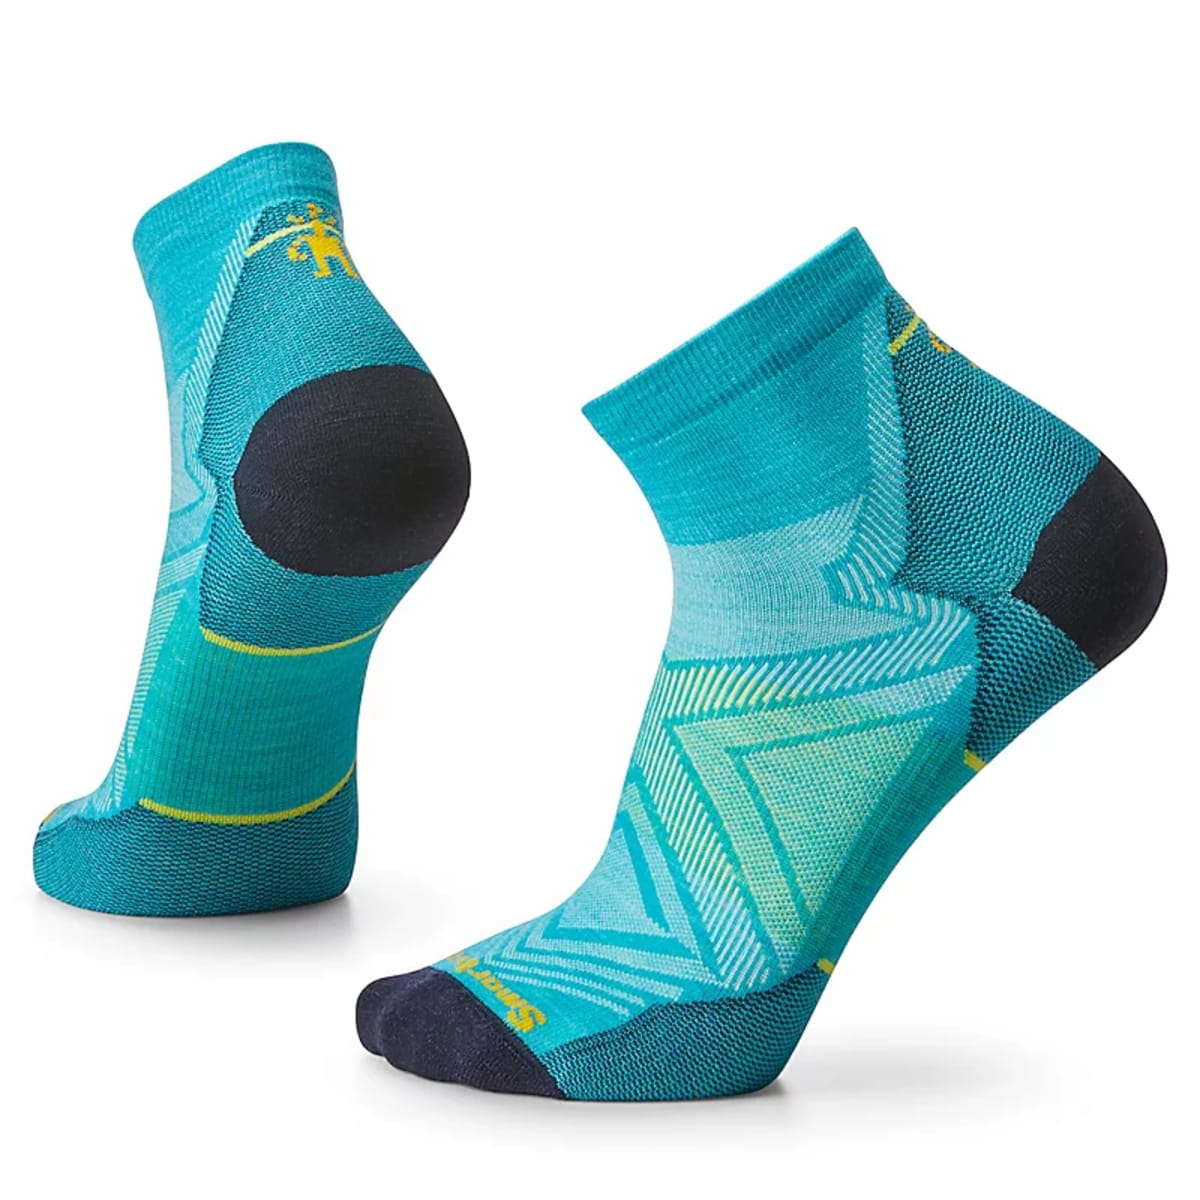 The Best-Selling Crew Socks Are Up to 47% Off at